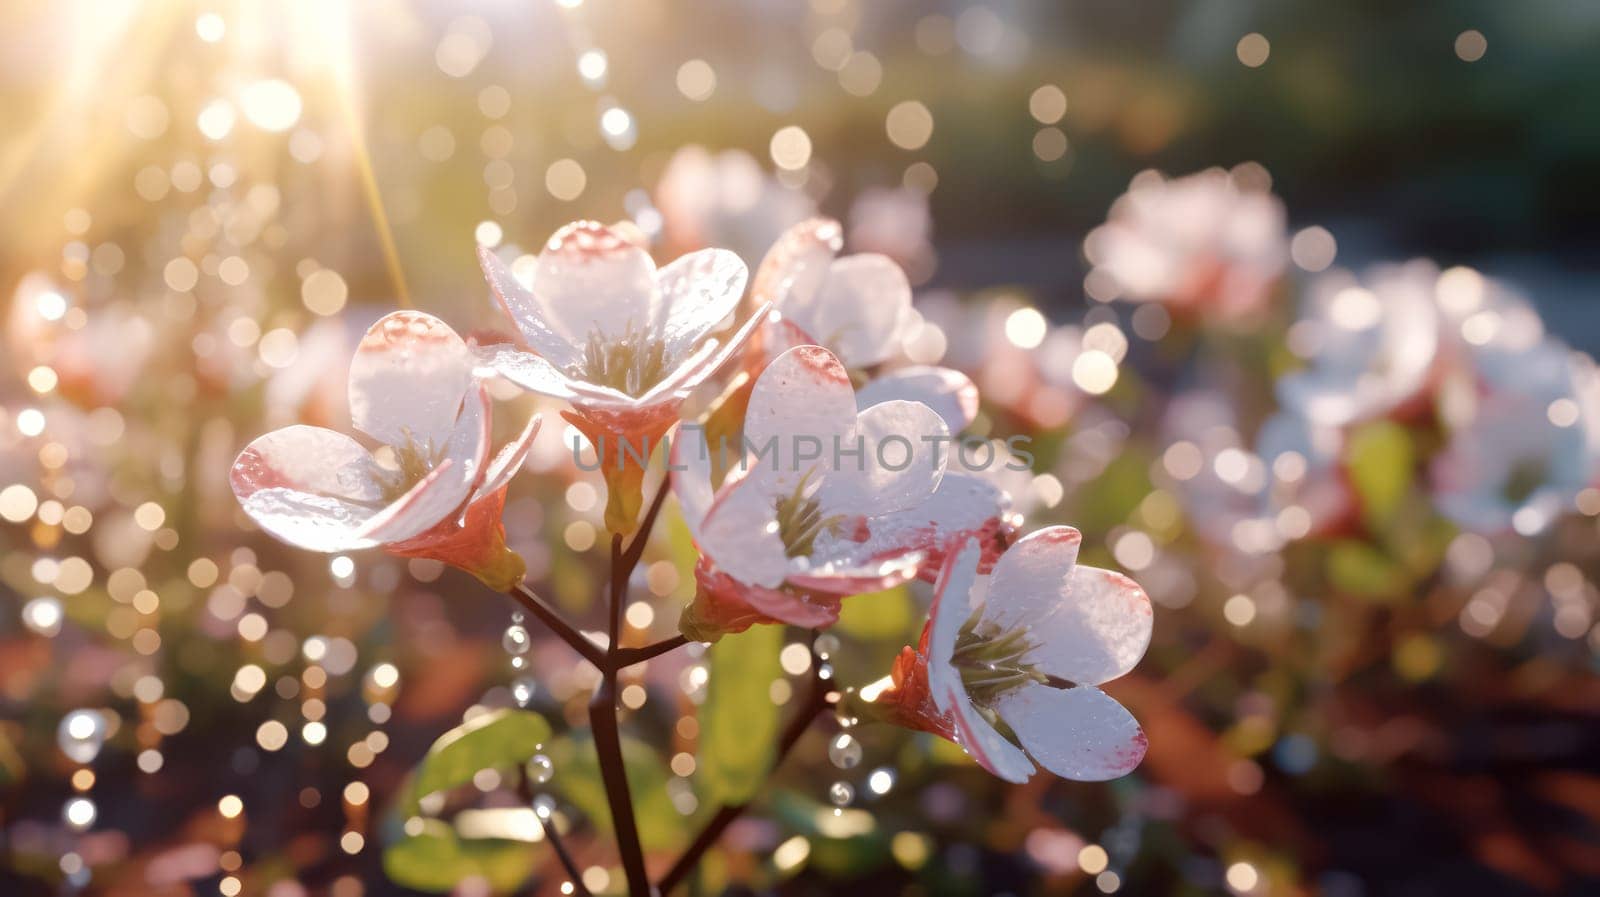 Shiny meadow flowers, decorated with raindrops by Alla_Morozova93